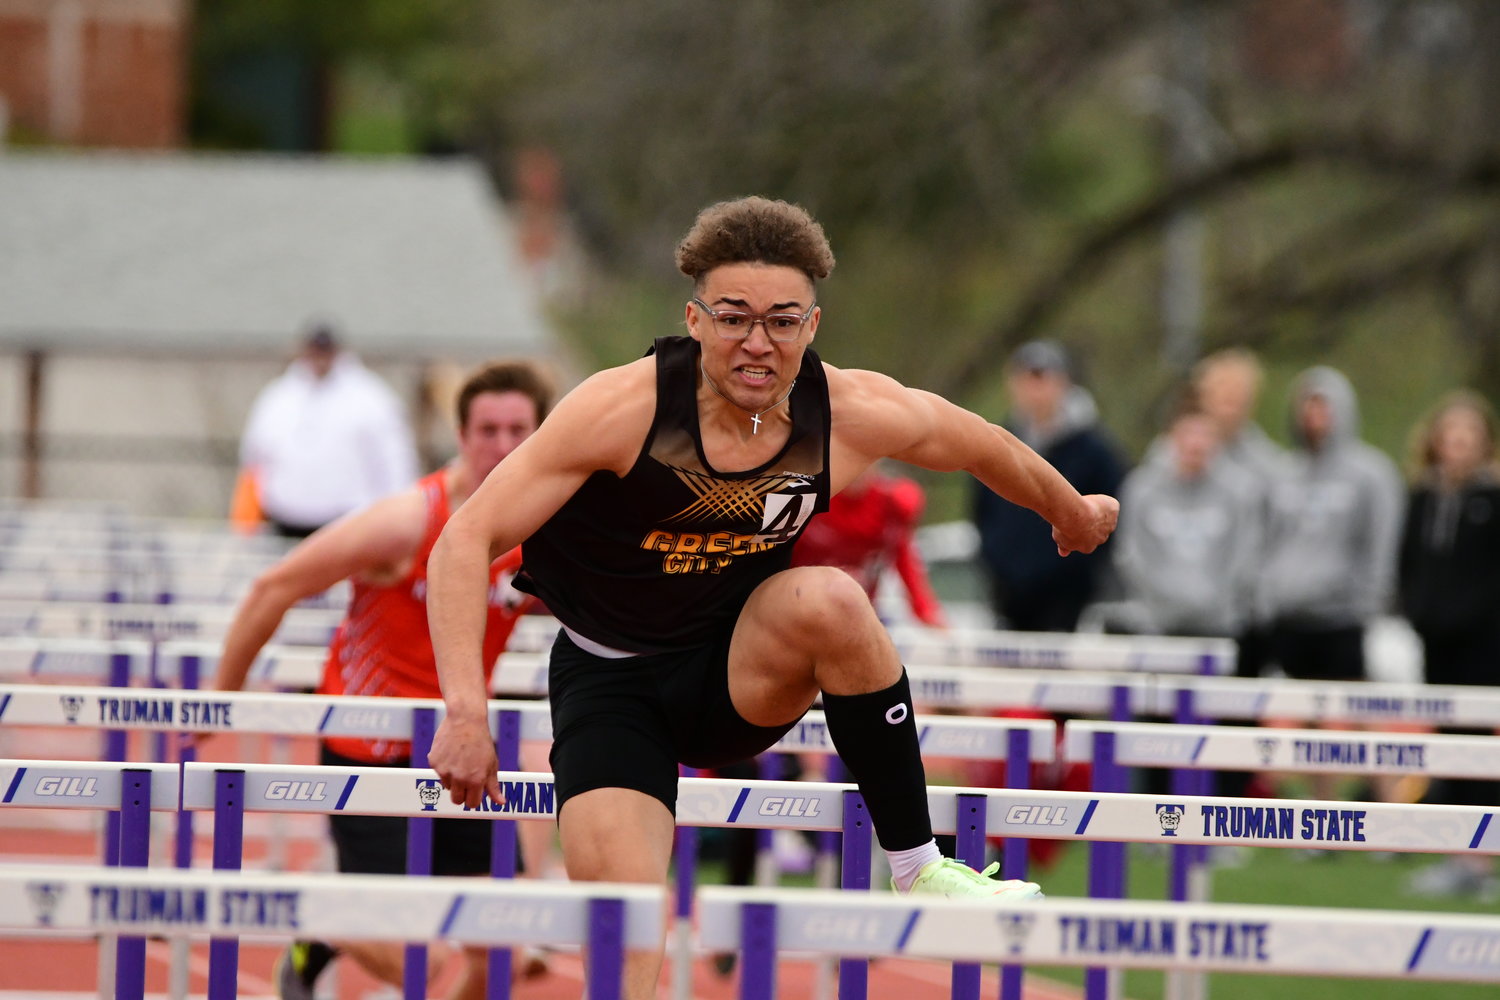 Green City's Asher Buggs-Tipton runs during the boys 110m hurdles race at Tuesday's Truman State High School Invitational. He set a meet record with a time of 14.85 seconds.